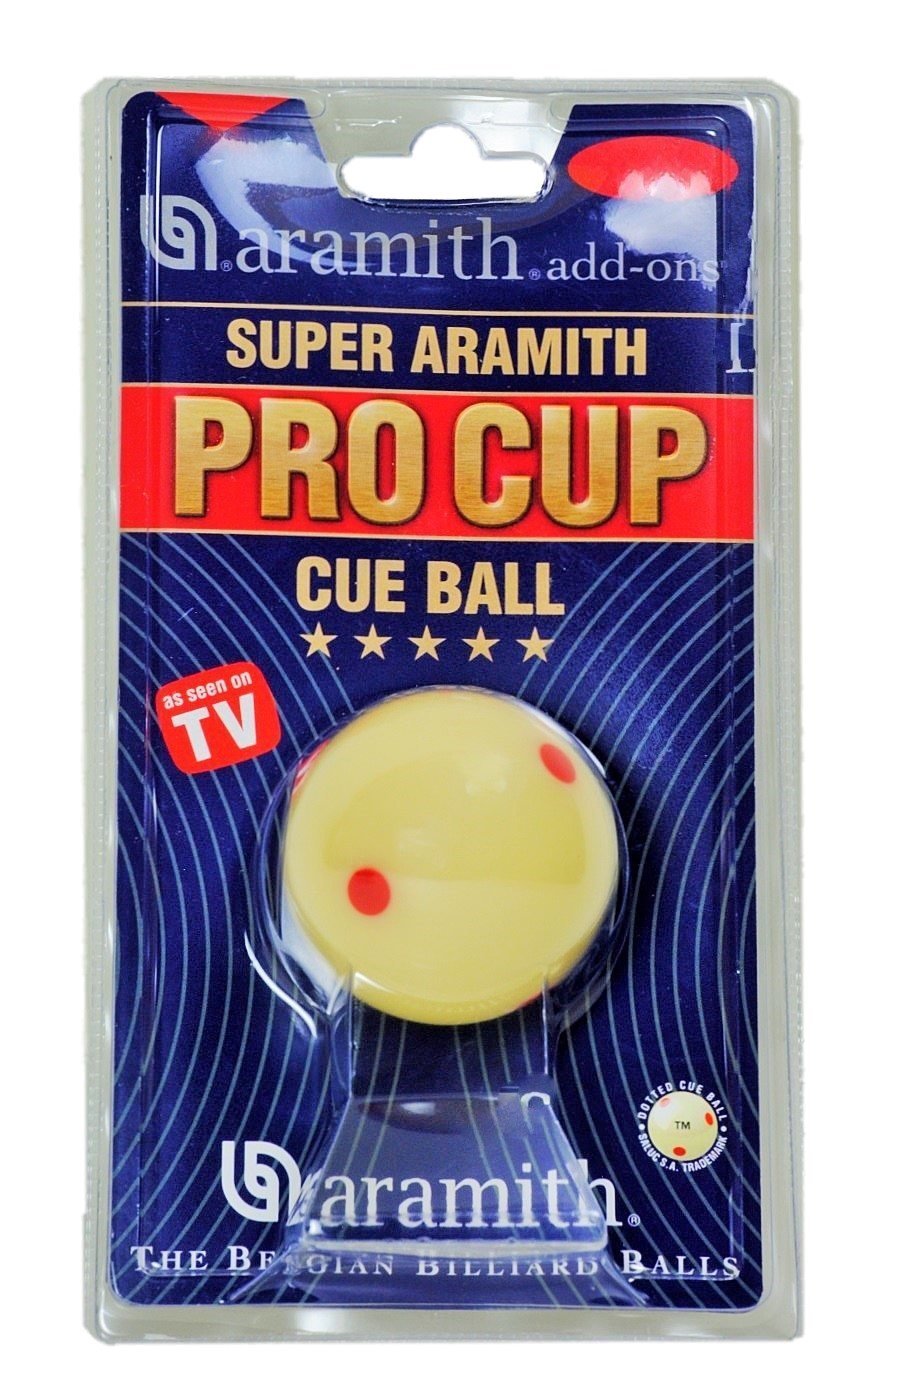 [AUSTRALIA] - Aramith 2-1/4" Regulation Size Billiard/Pool Ball: Super Pro Cup Cue Ball with 6 Red Dots 